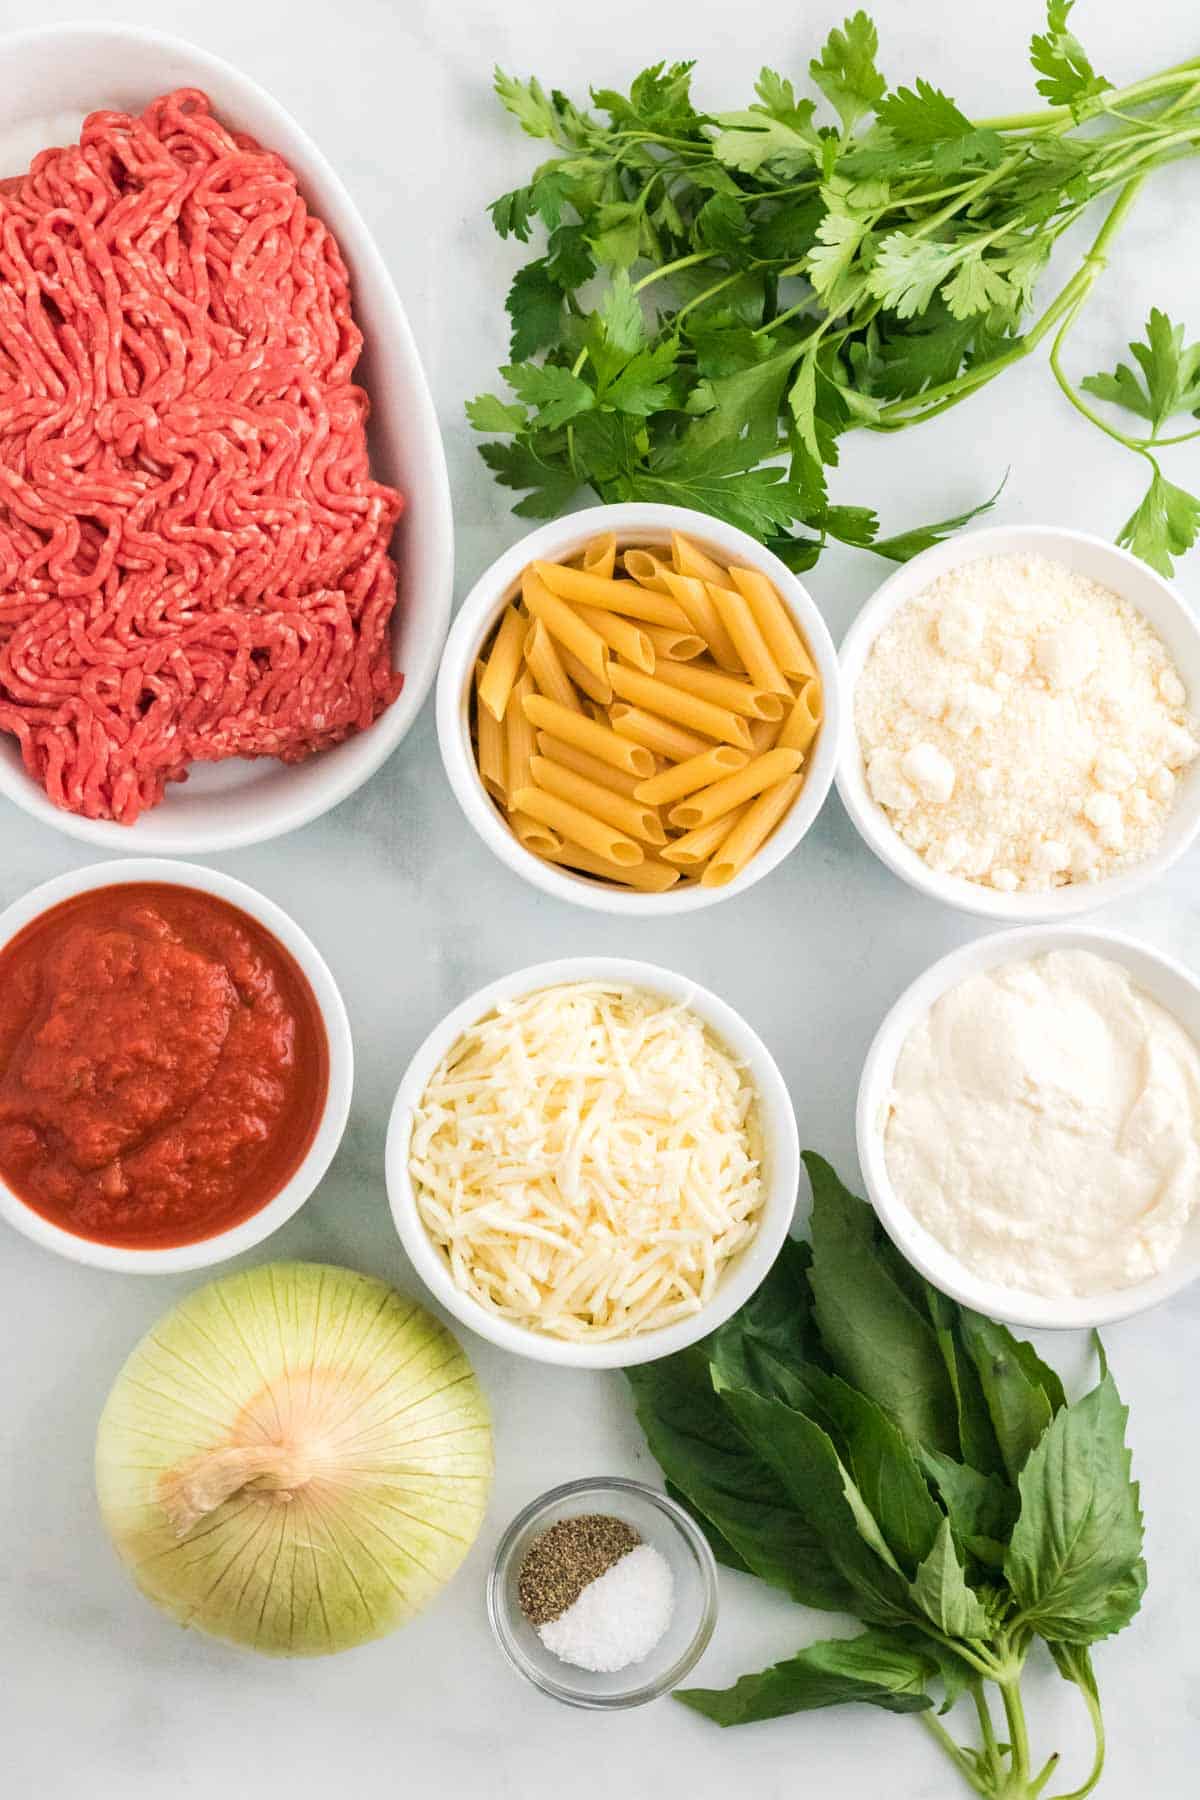 The ingredients for gluten free baked ziti.